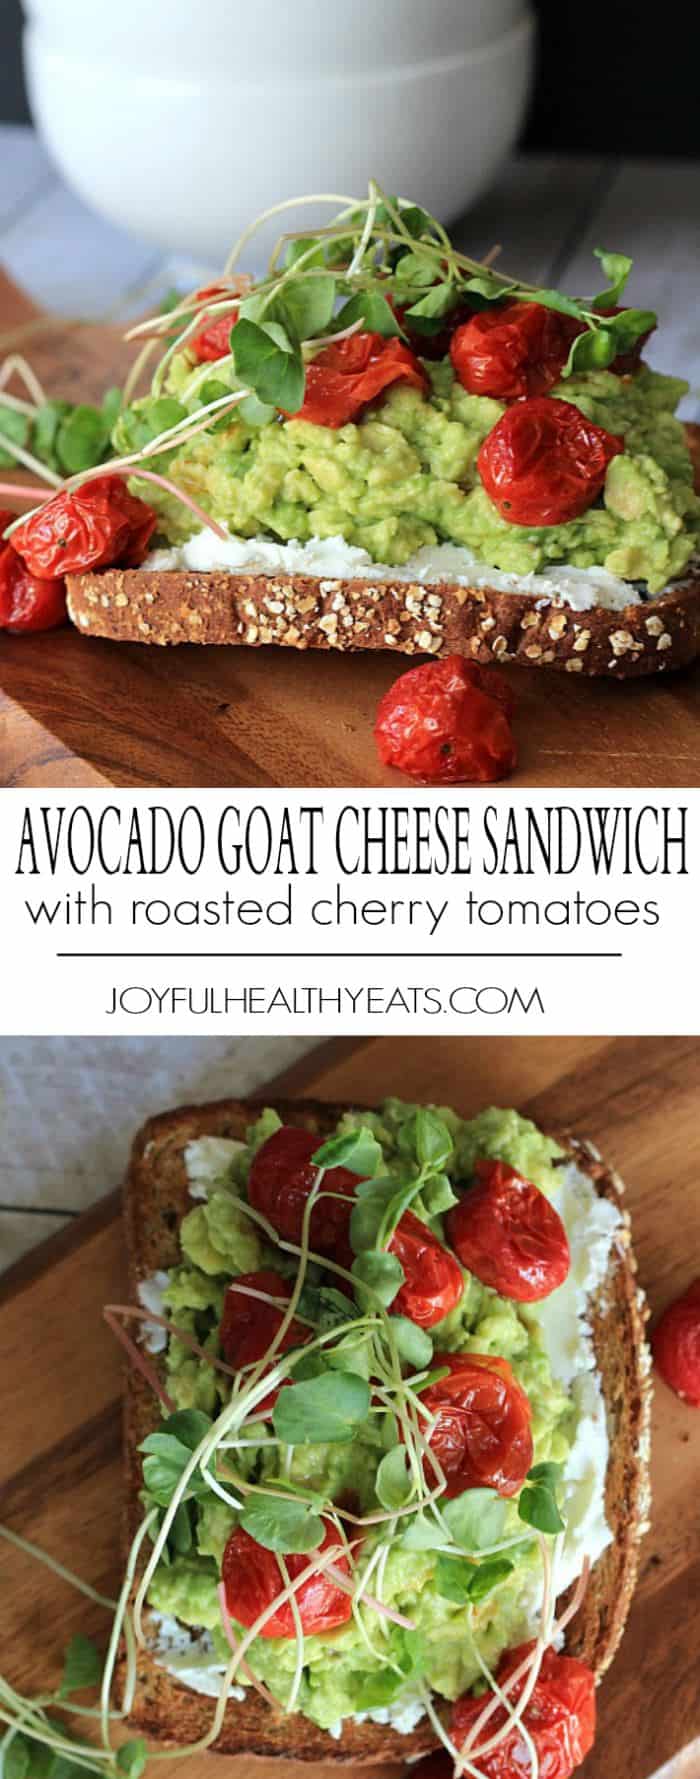 Mashed Avocado Goat Cheese Sandwich topped with roasted cherry tomatoes and sprouts! Healthy, filled with good fats, perfect for a quick lunch recipe! | joyfulhealthyeats.com 